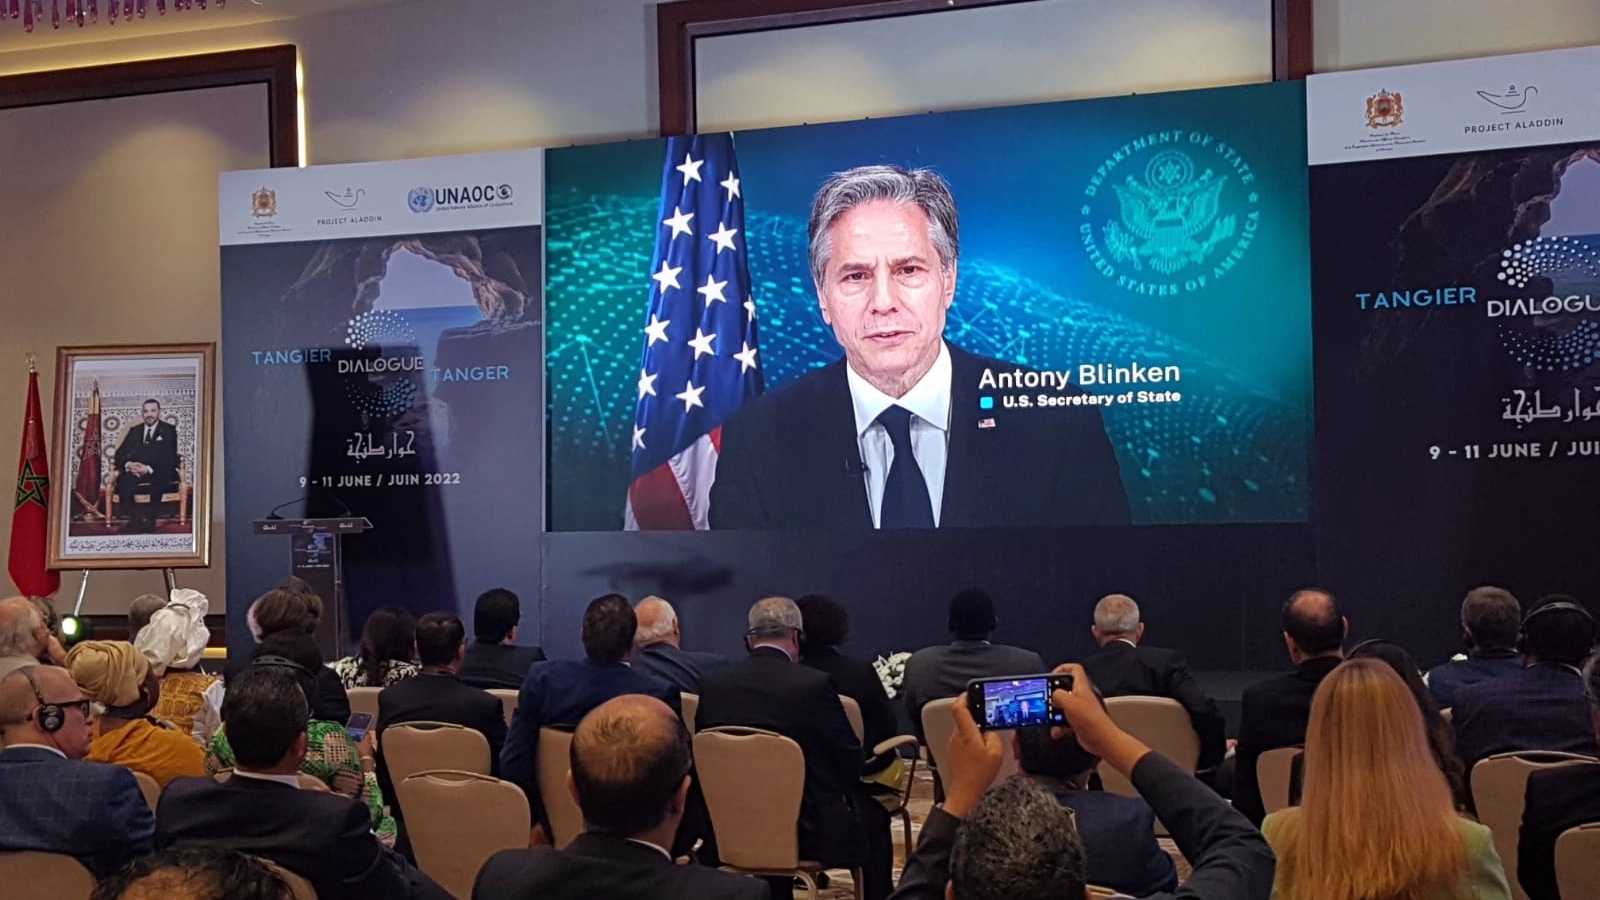 U.S. Secretary of State lauds Morocco and Project Aladdin efforts in building bridges between cultures, Fighting Racism, Fanaticism 